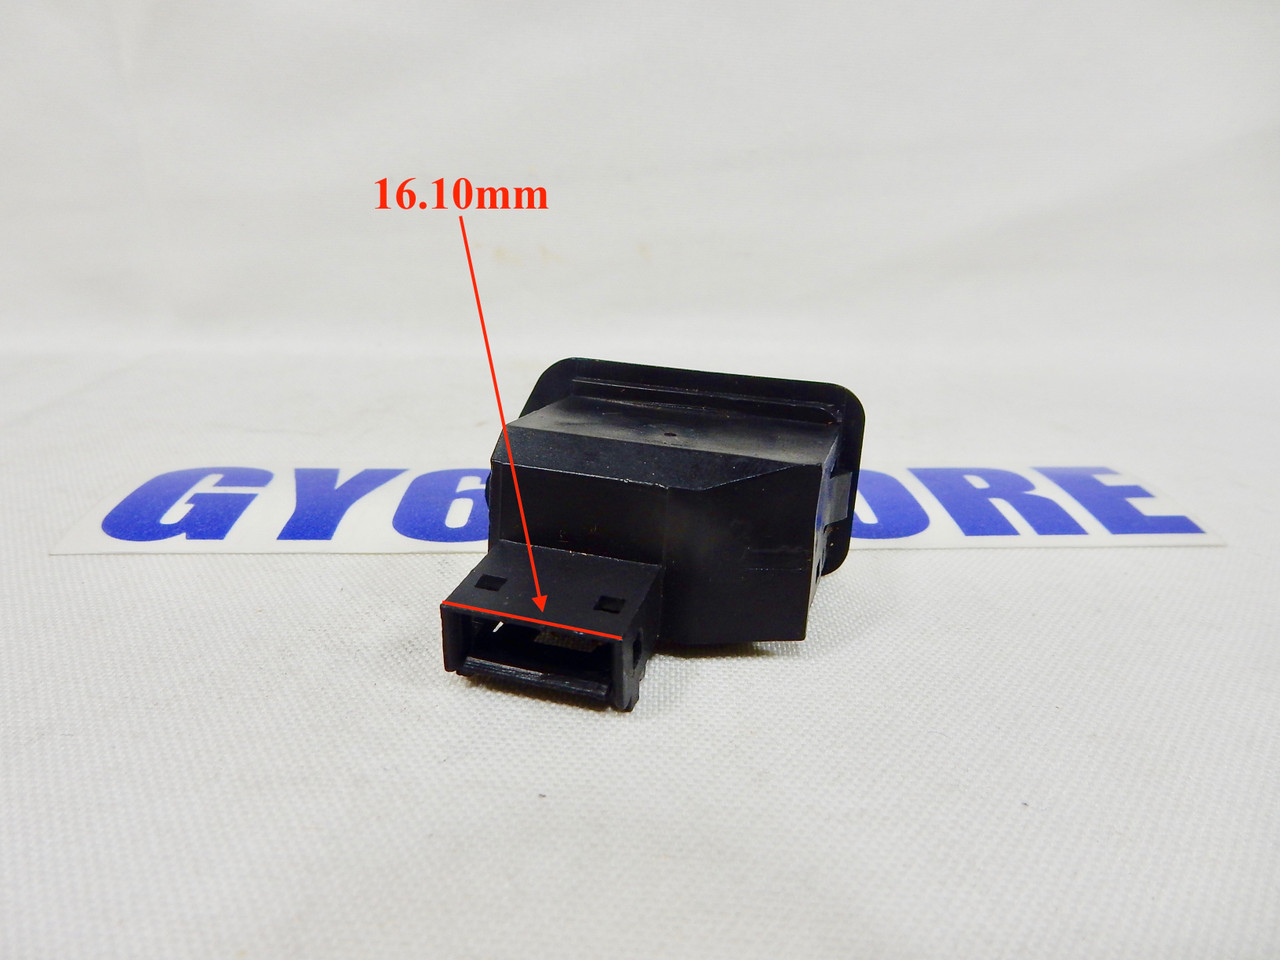 TURN SIGNAL LIGHT SWITCH (3 PIN) FOR 50cc QMB139 OR 150cc GY6 SCOOTER *TYPE 1*